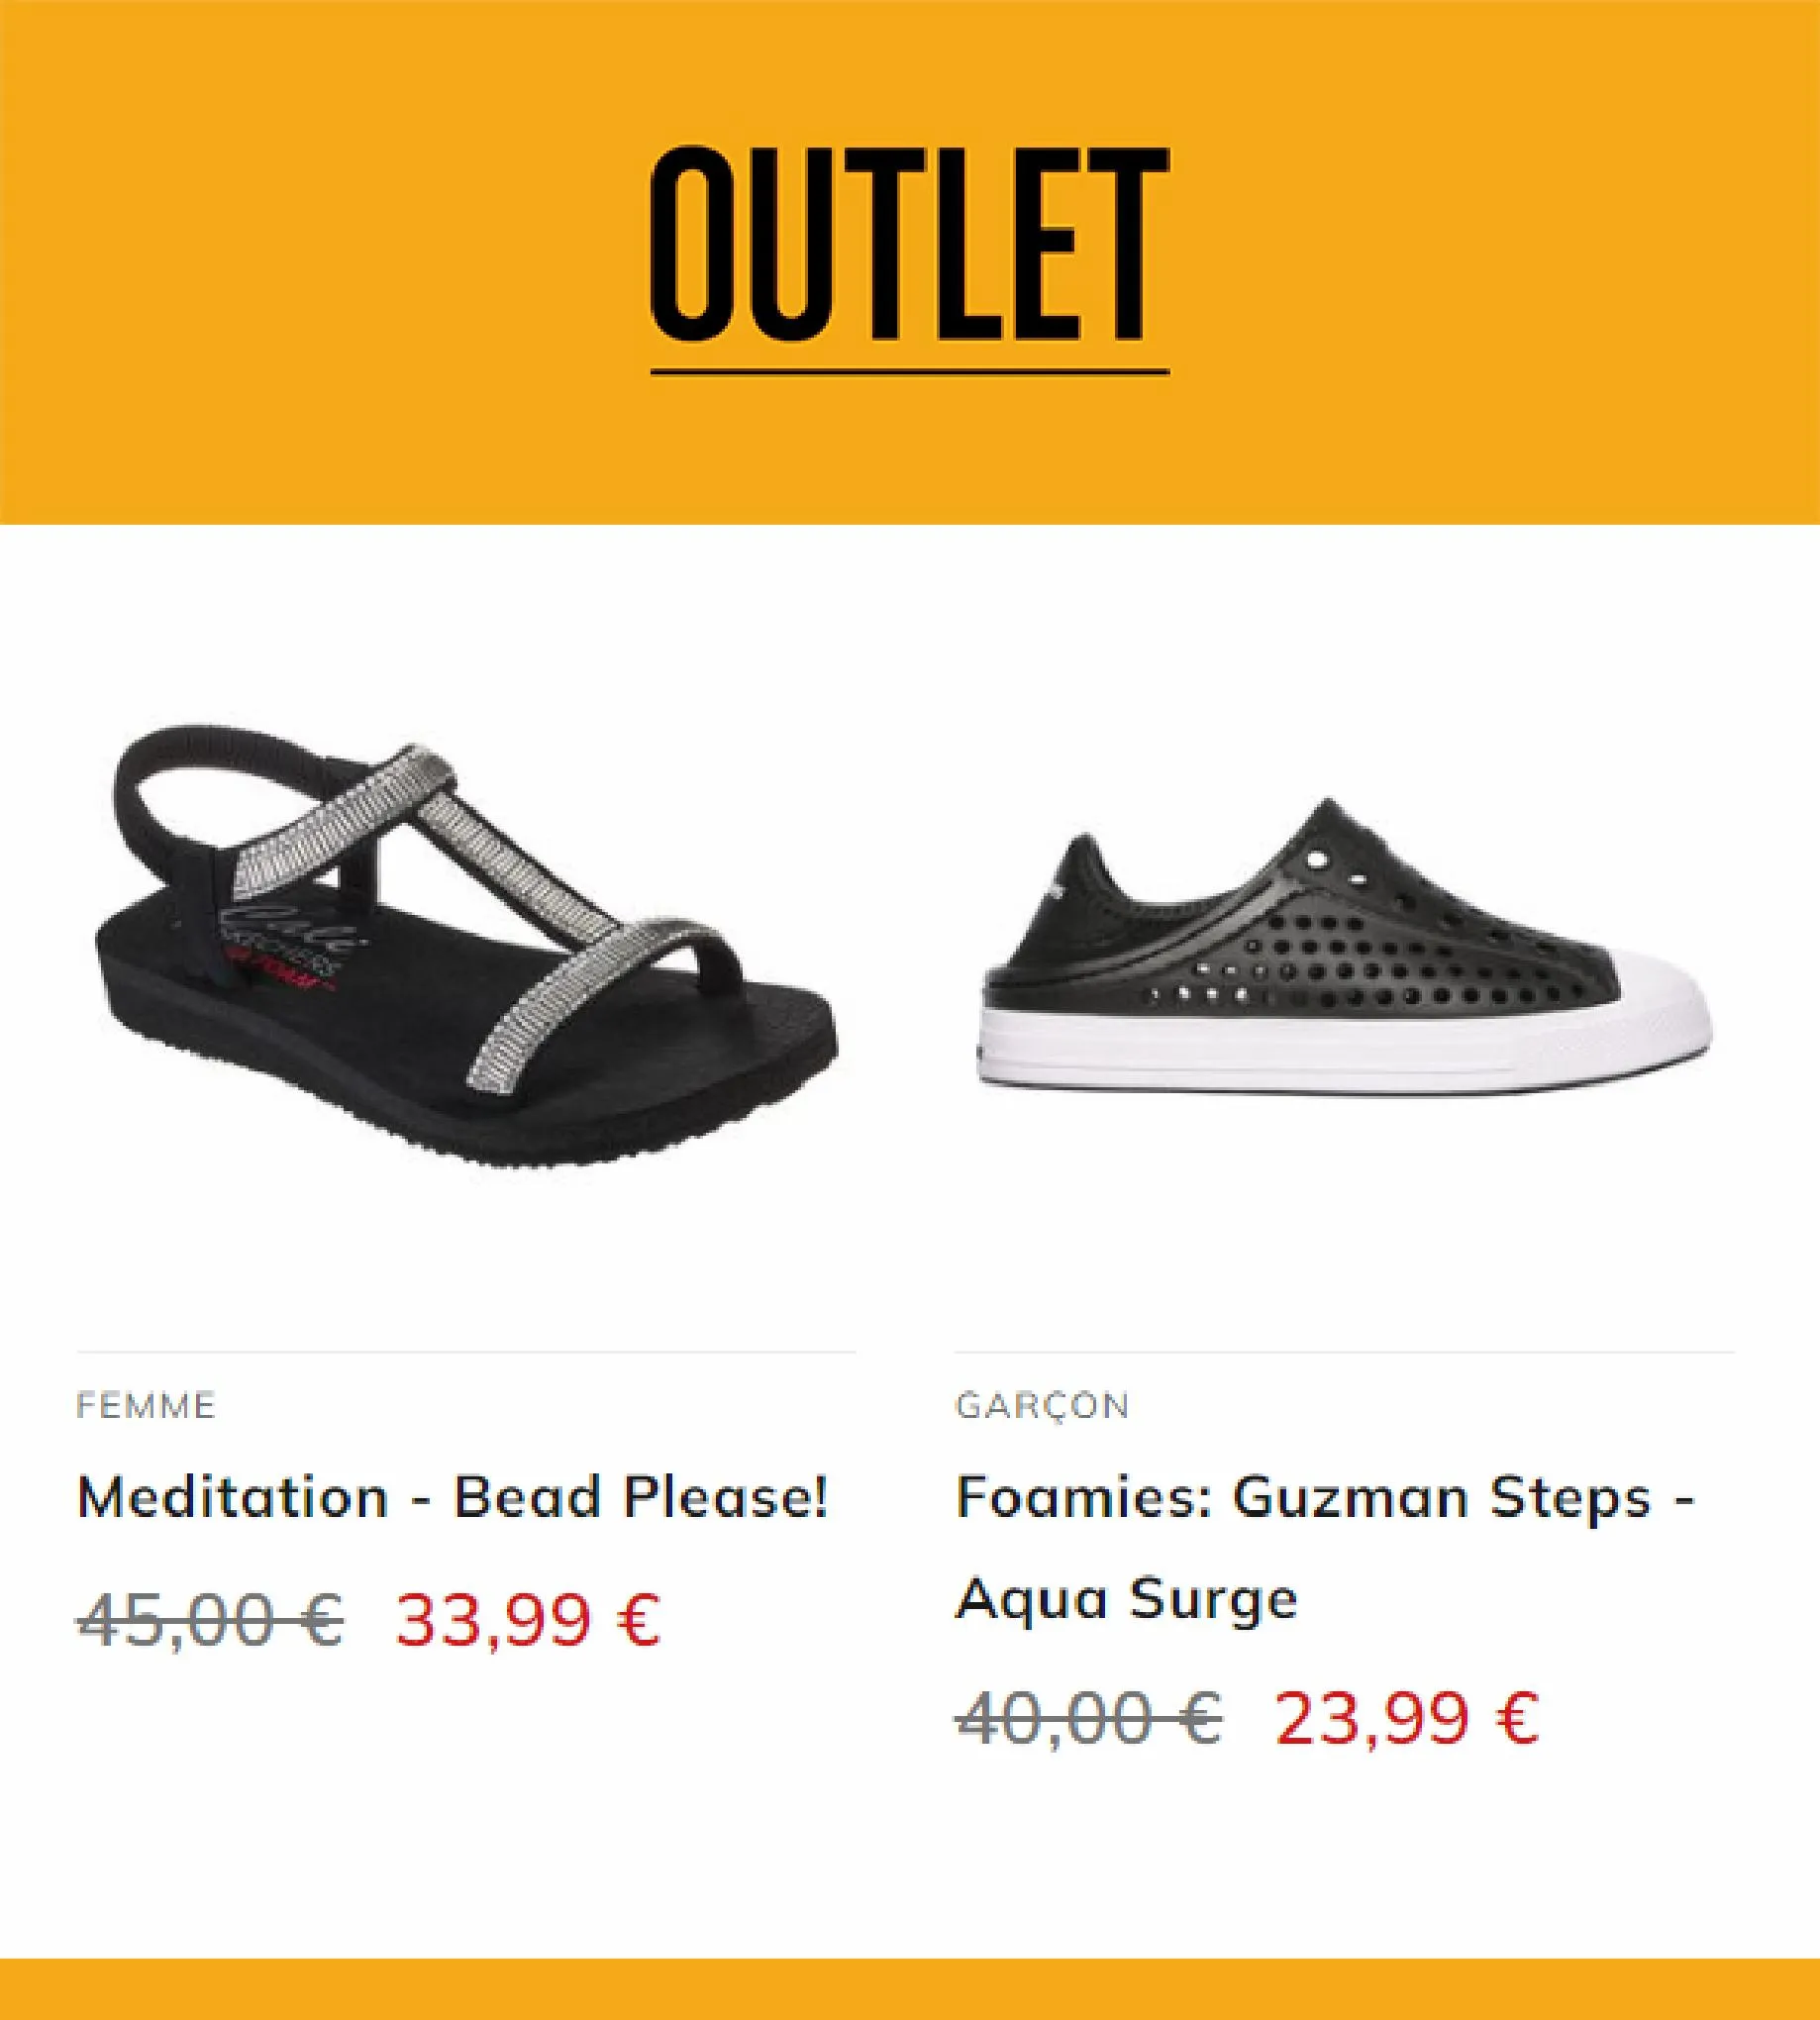 Catalogue Outlet Sketchers, page 00002